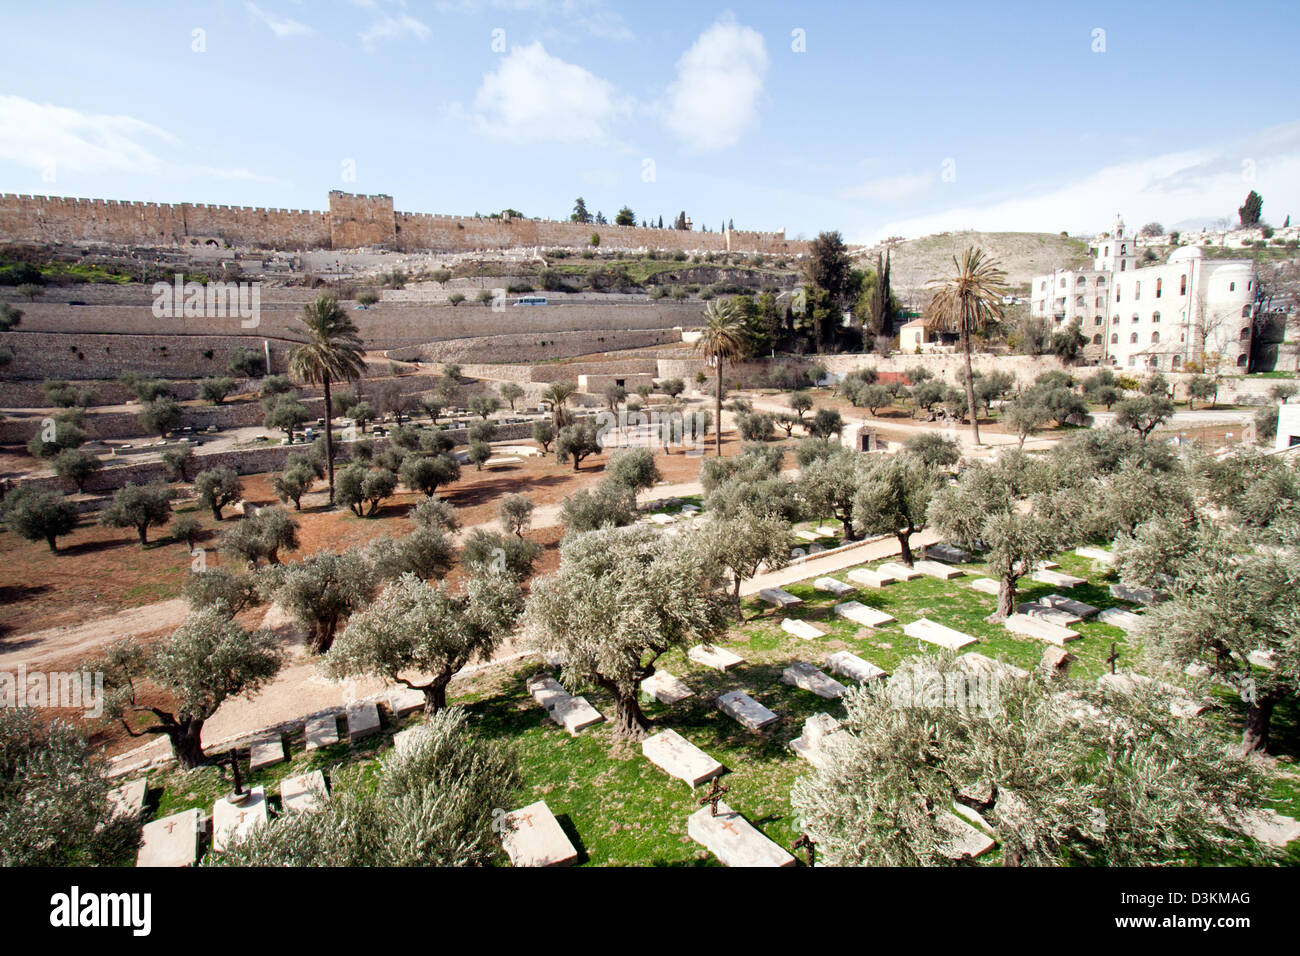 Christian graves at the Mount of Olives in Jerusalem - Israel Stock Photo